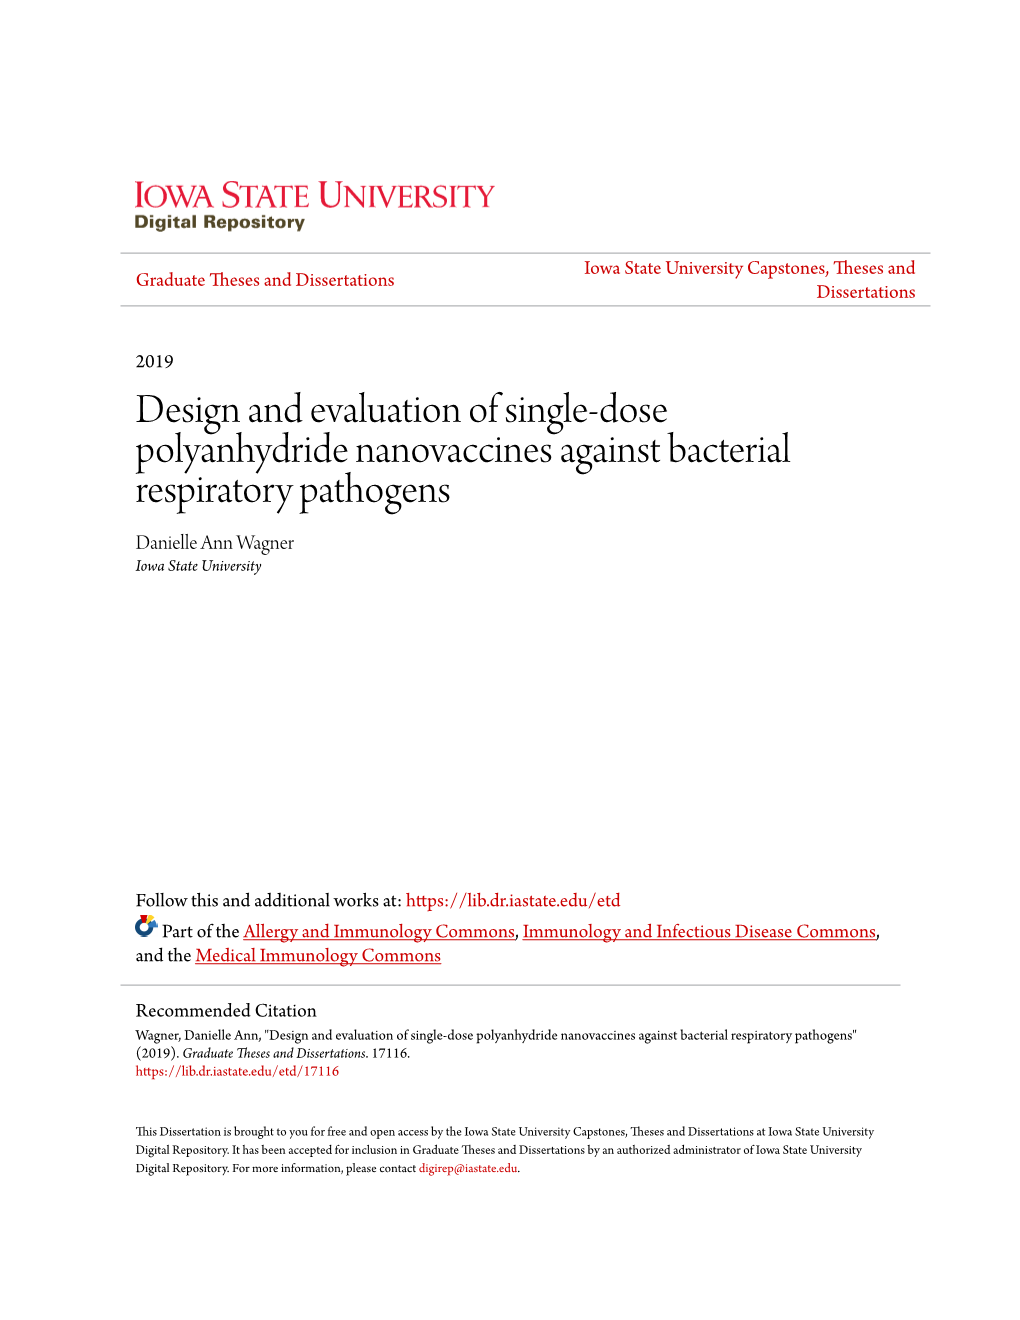 Design and Evaluation of Single-Dose Polyanhydride Nanovaccines Against Bacterial Respiratory Pathogens Danielle Ann Wagner Iowa State University